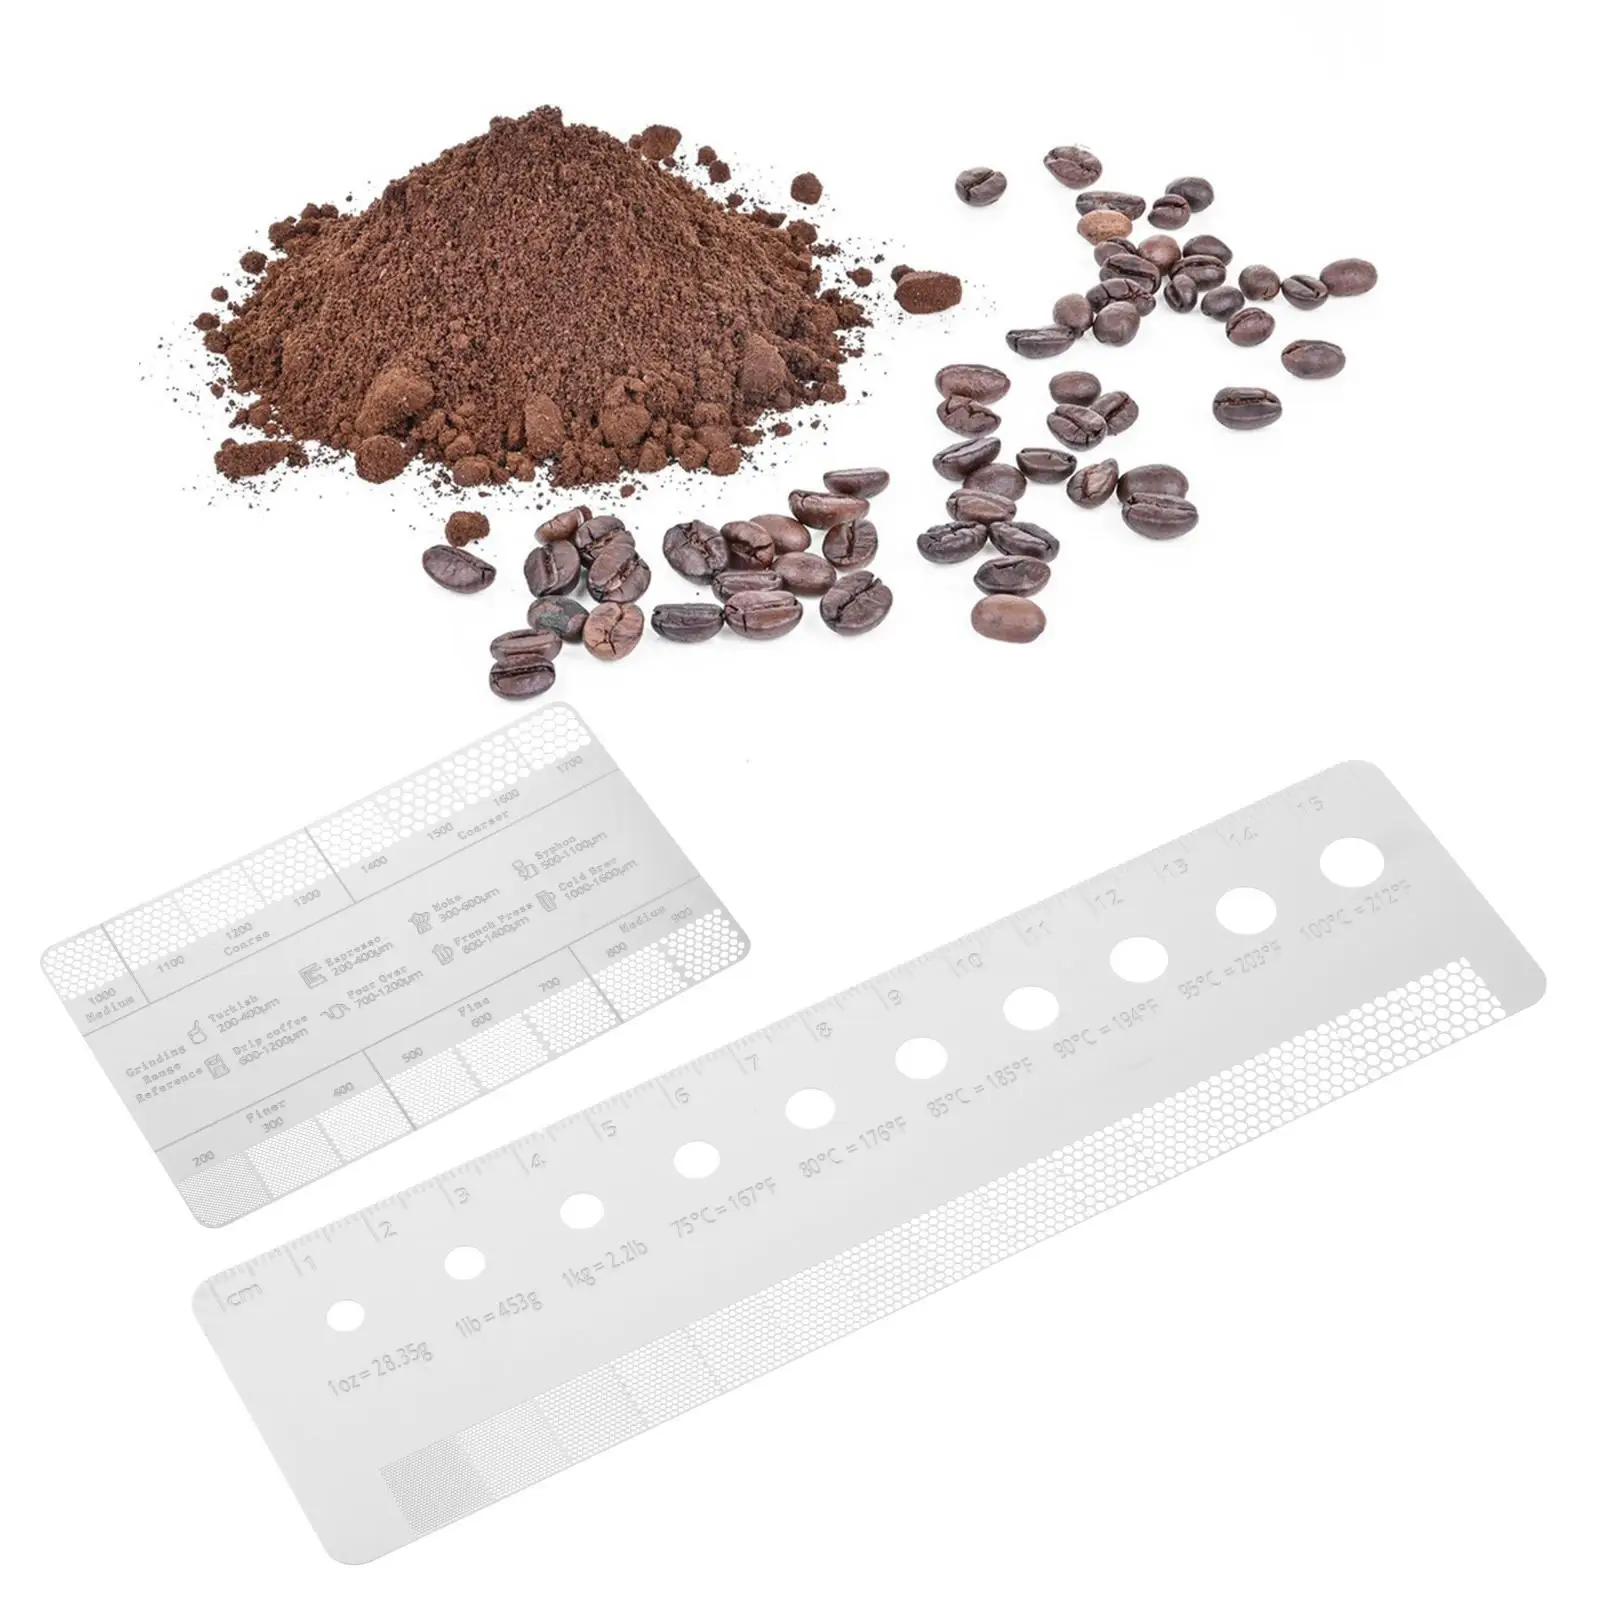 Coffee Ground Measuring Ruler Roughness Gauge Card Ground Coarseness Reference Espresso Beans Measuring for Coffee Maker Cafes